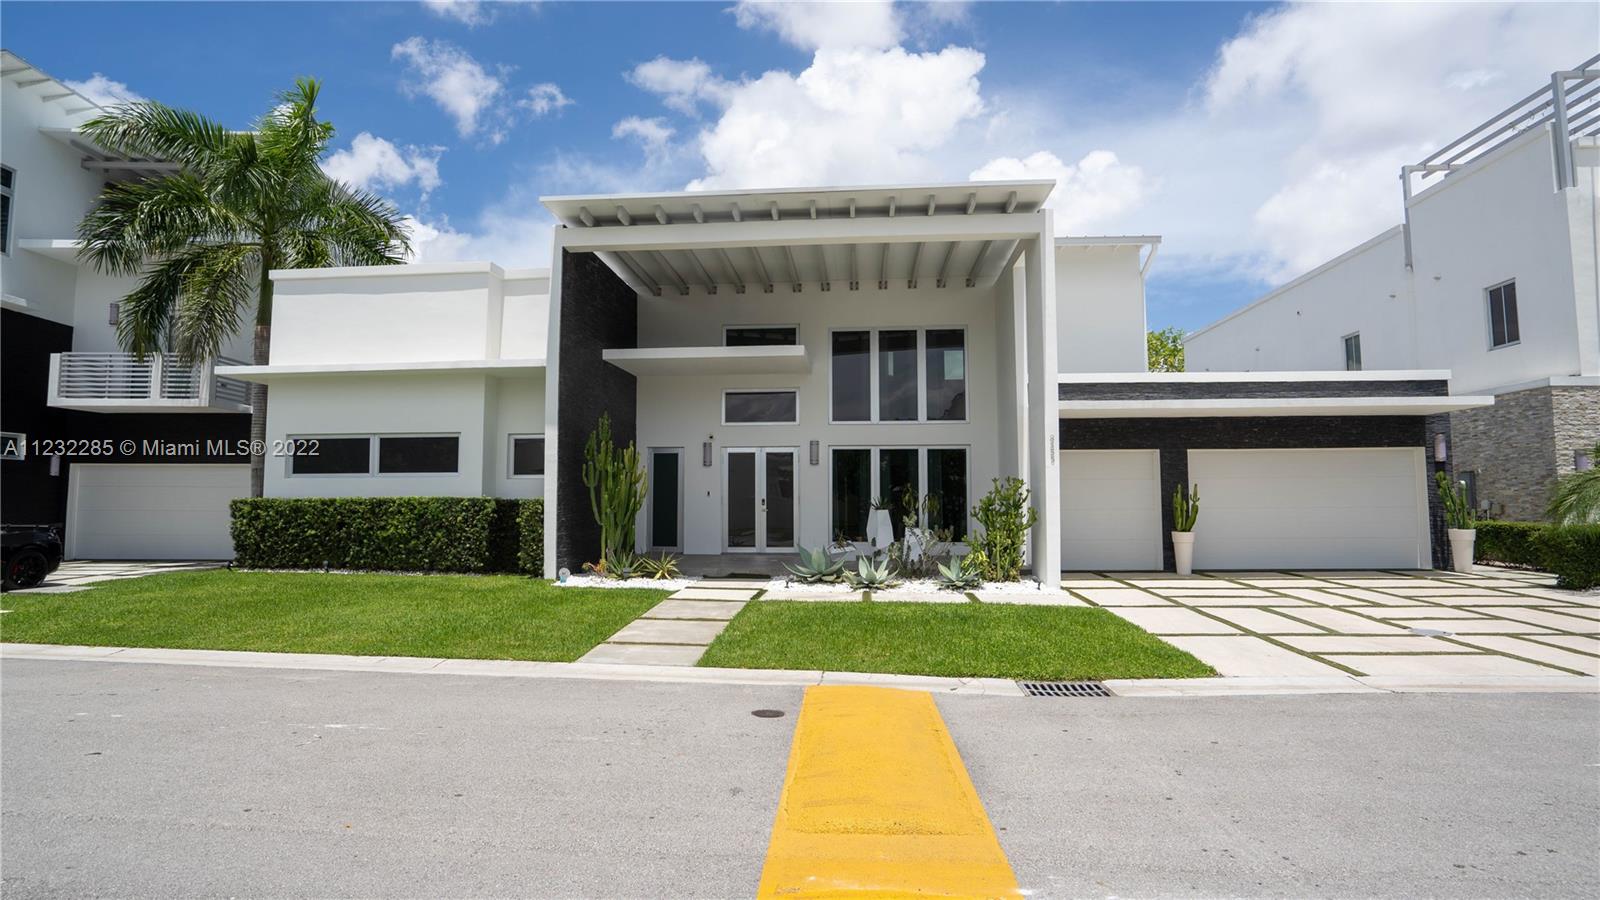 This sophisticated contemporary House is set on 9,461 Sq.Ft Lot. Located in the exclusive gated community of Oasis at Park Square in the desired city of Doral, High ceilings and abundant light throughout. The interior portion spans 4,201 Sq.Ft with 6 bedrooms and 6 bathrooms, primary suite with large walk-in closets, breathtaking finishes, a beautiful decorative wine cellar,  open space design, an ample chef’s kitchen with top of the line appliances, Large pool and builtin barbecue area. This House has it all, luxury and great location.